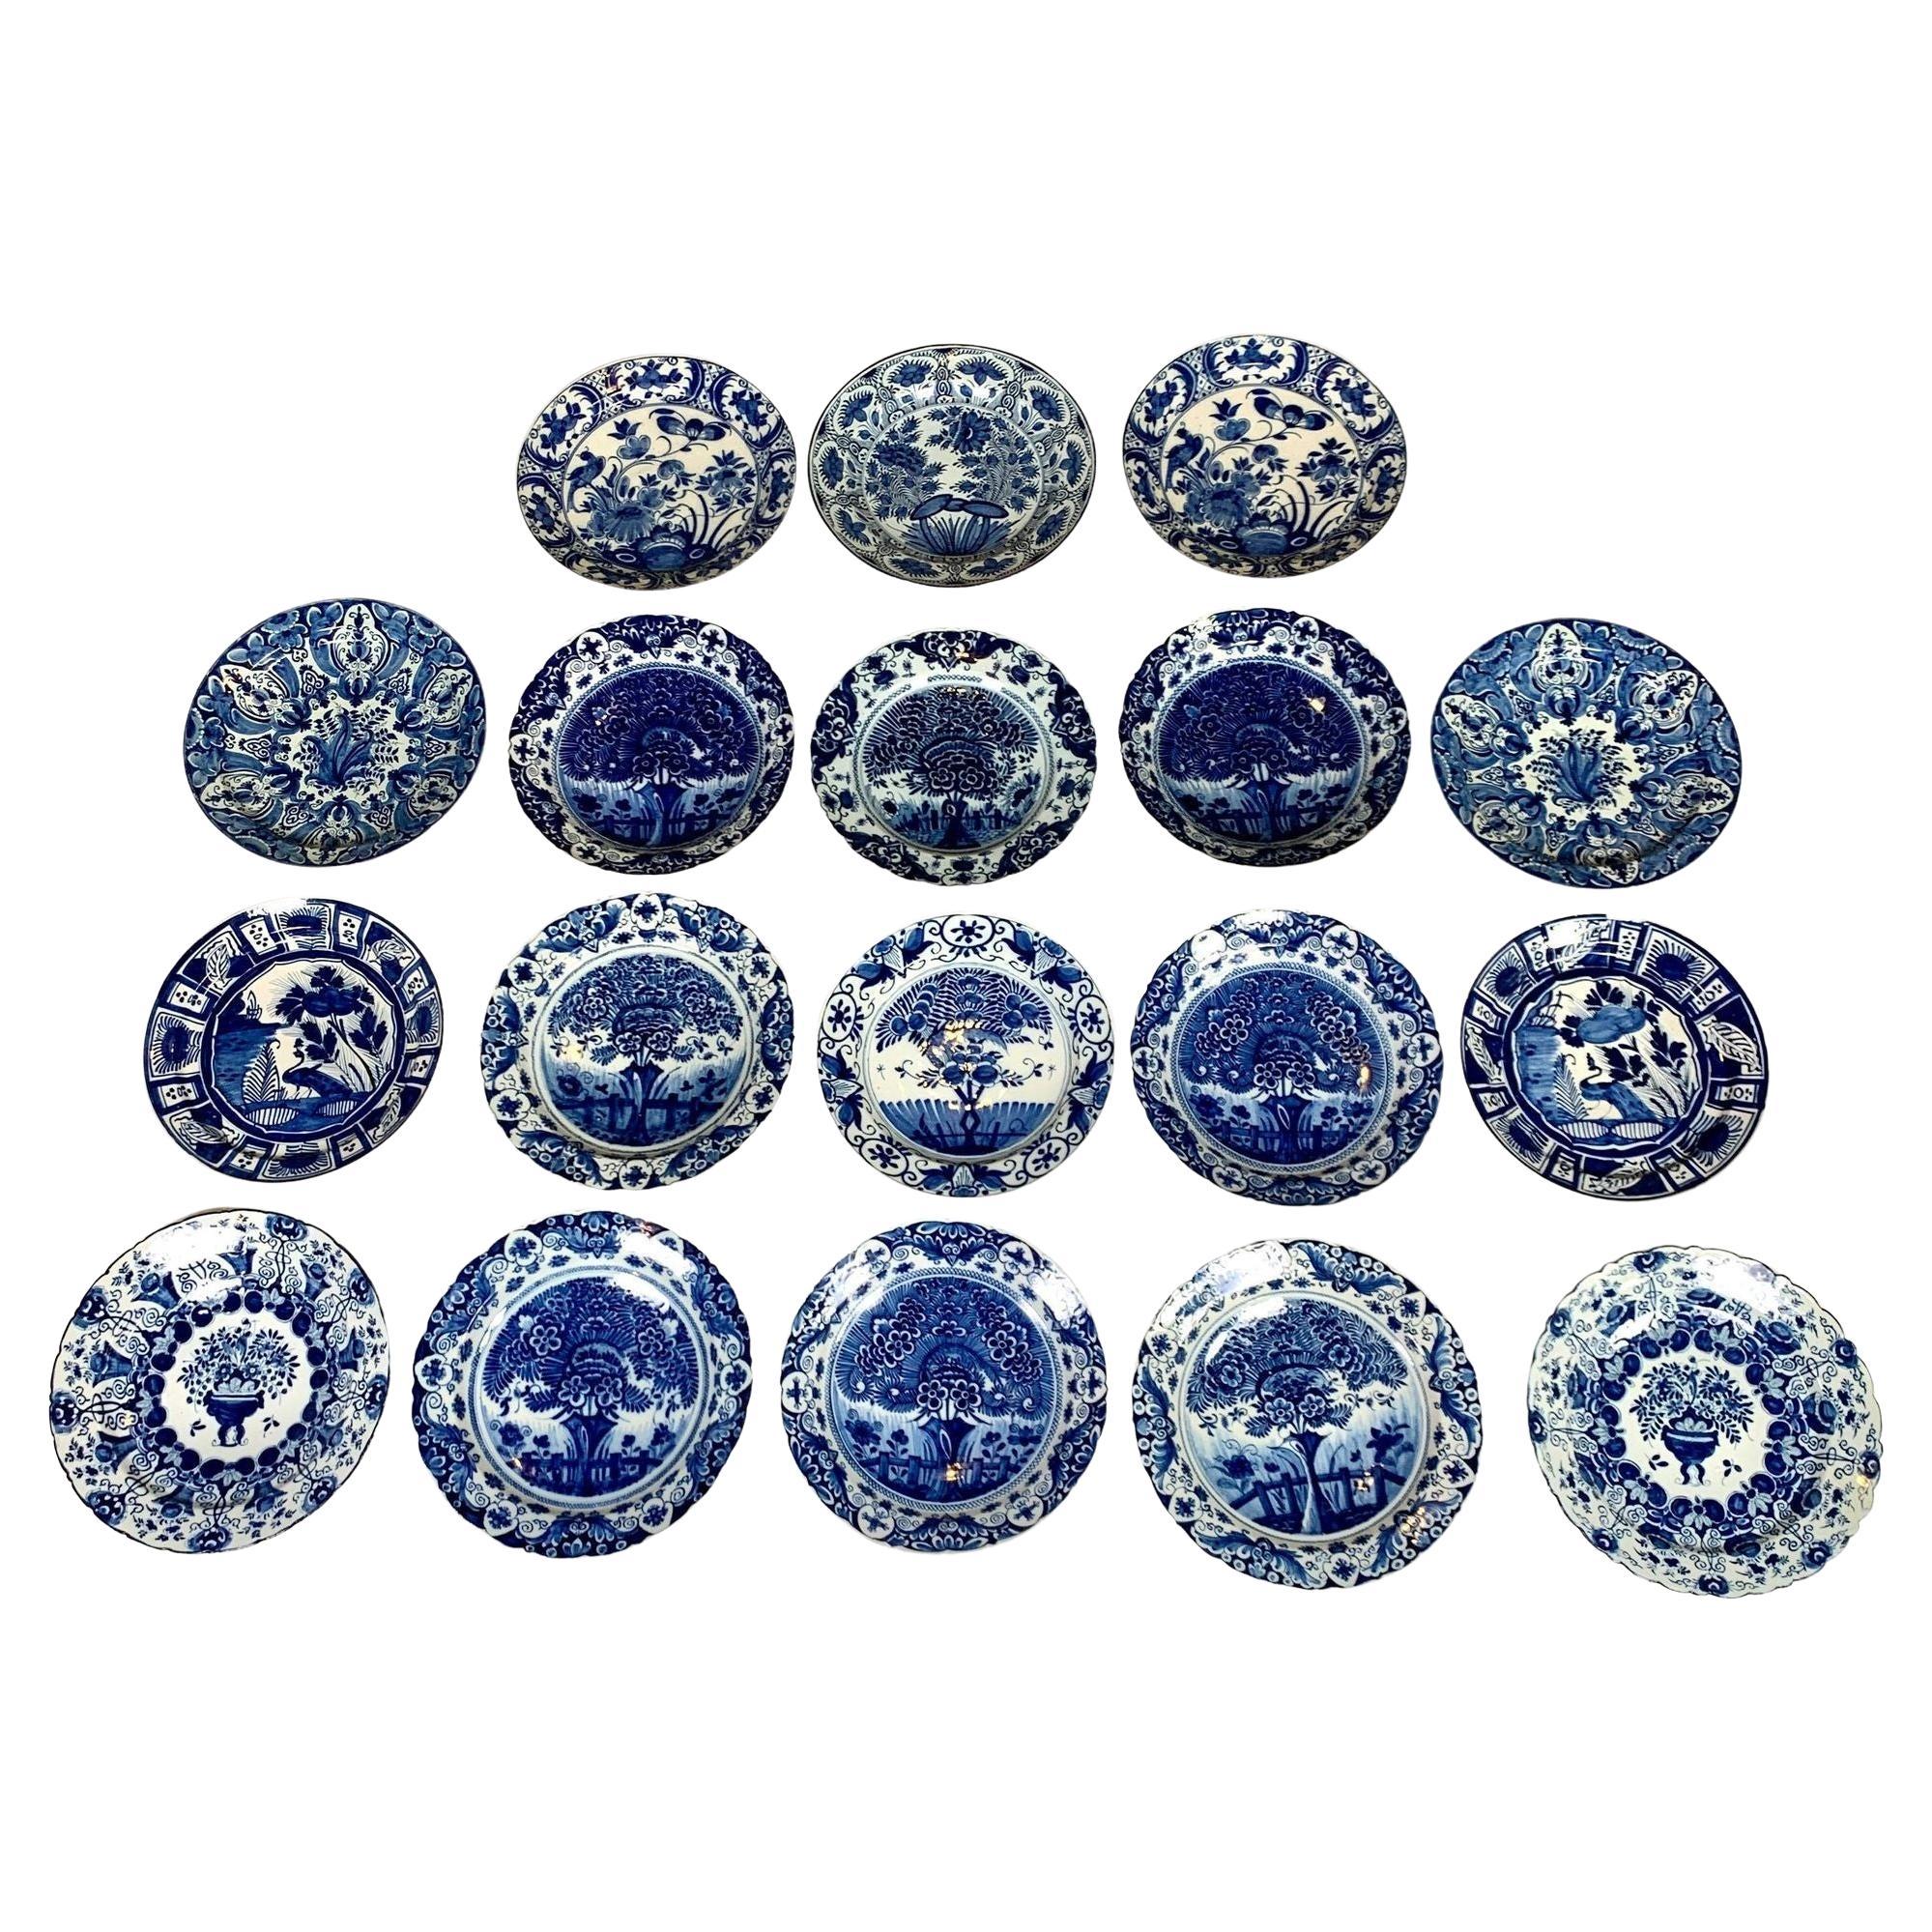 Group Blue and White Delft Chargers 18 Pieces Netherlands, Circa 1760-1780